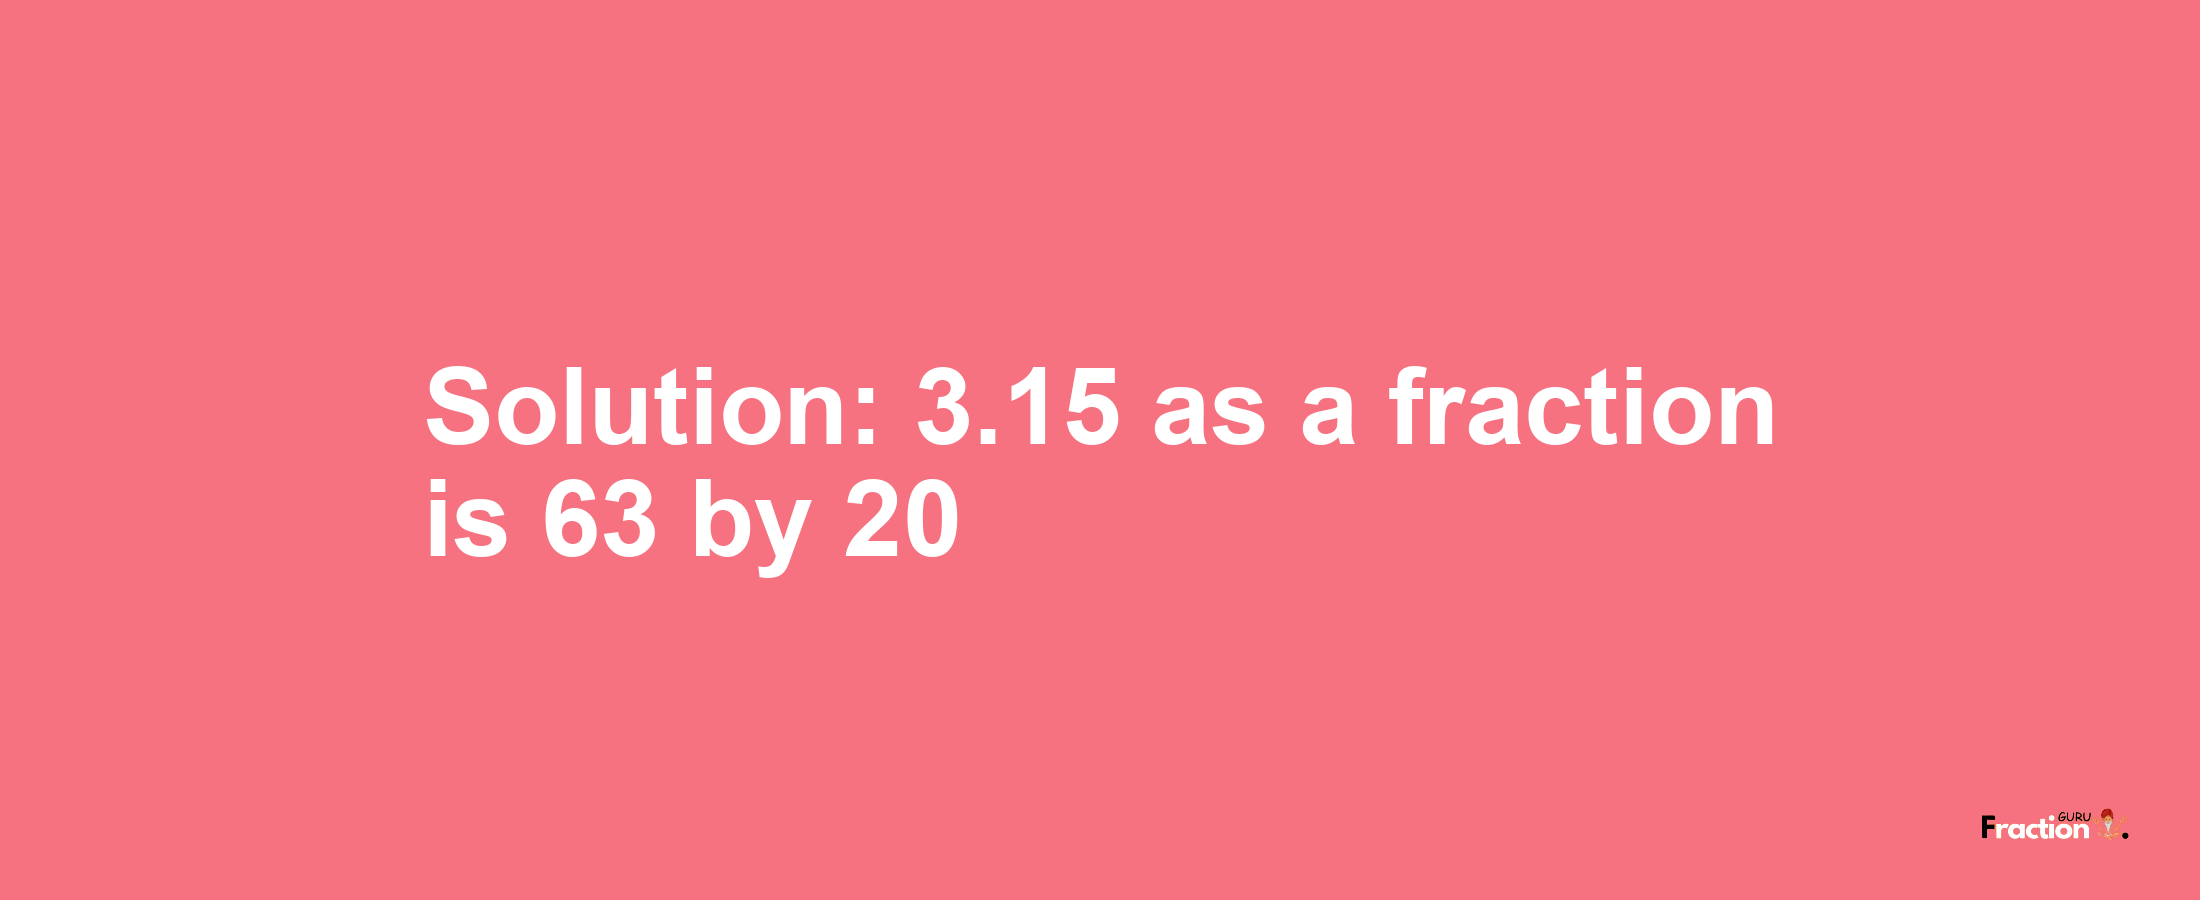 Solution:3.15 as a fraction is 63/20